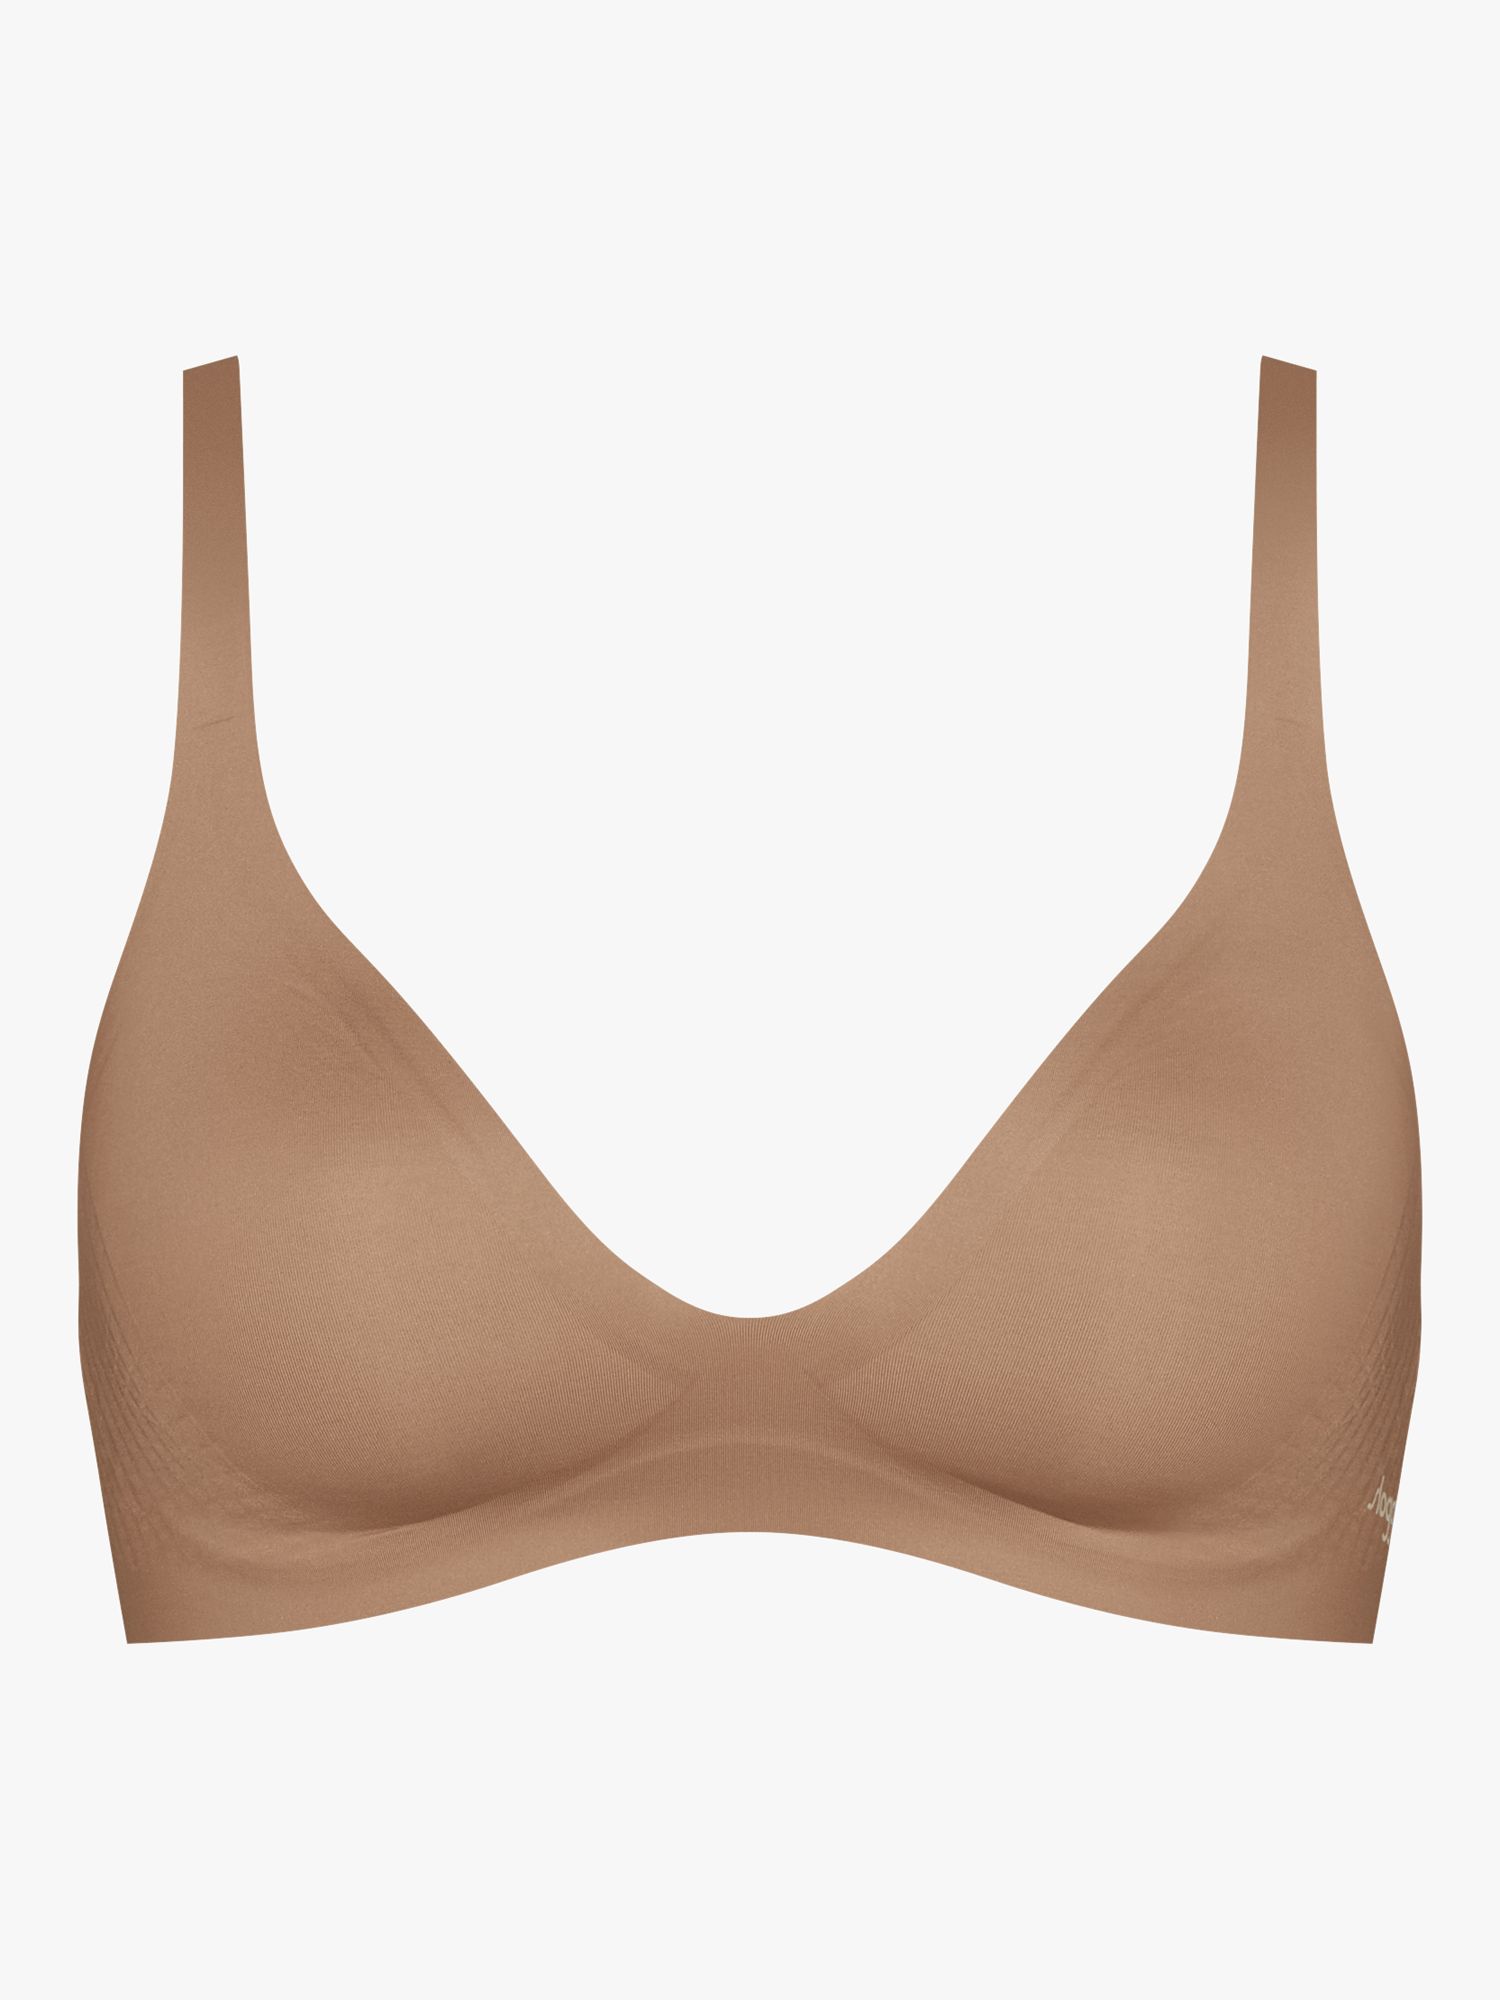 sloggi - Ill-fitting bra eating into your skin and